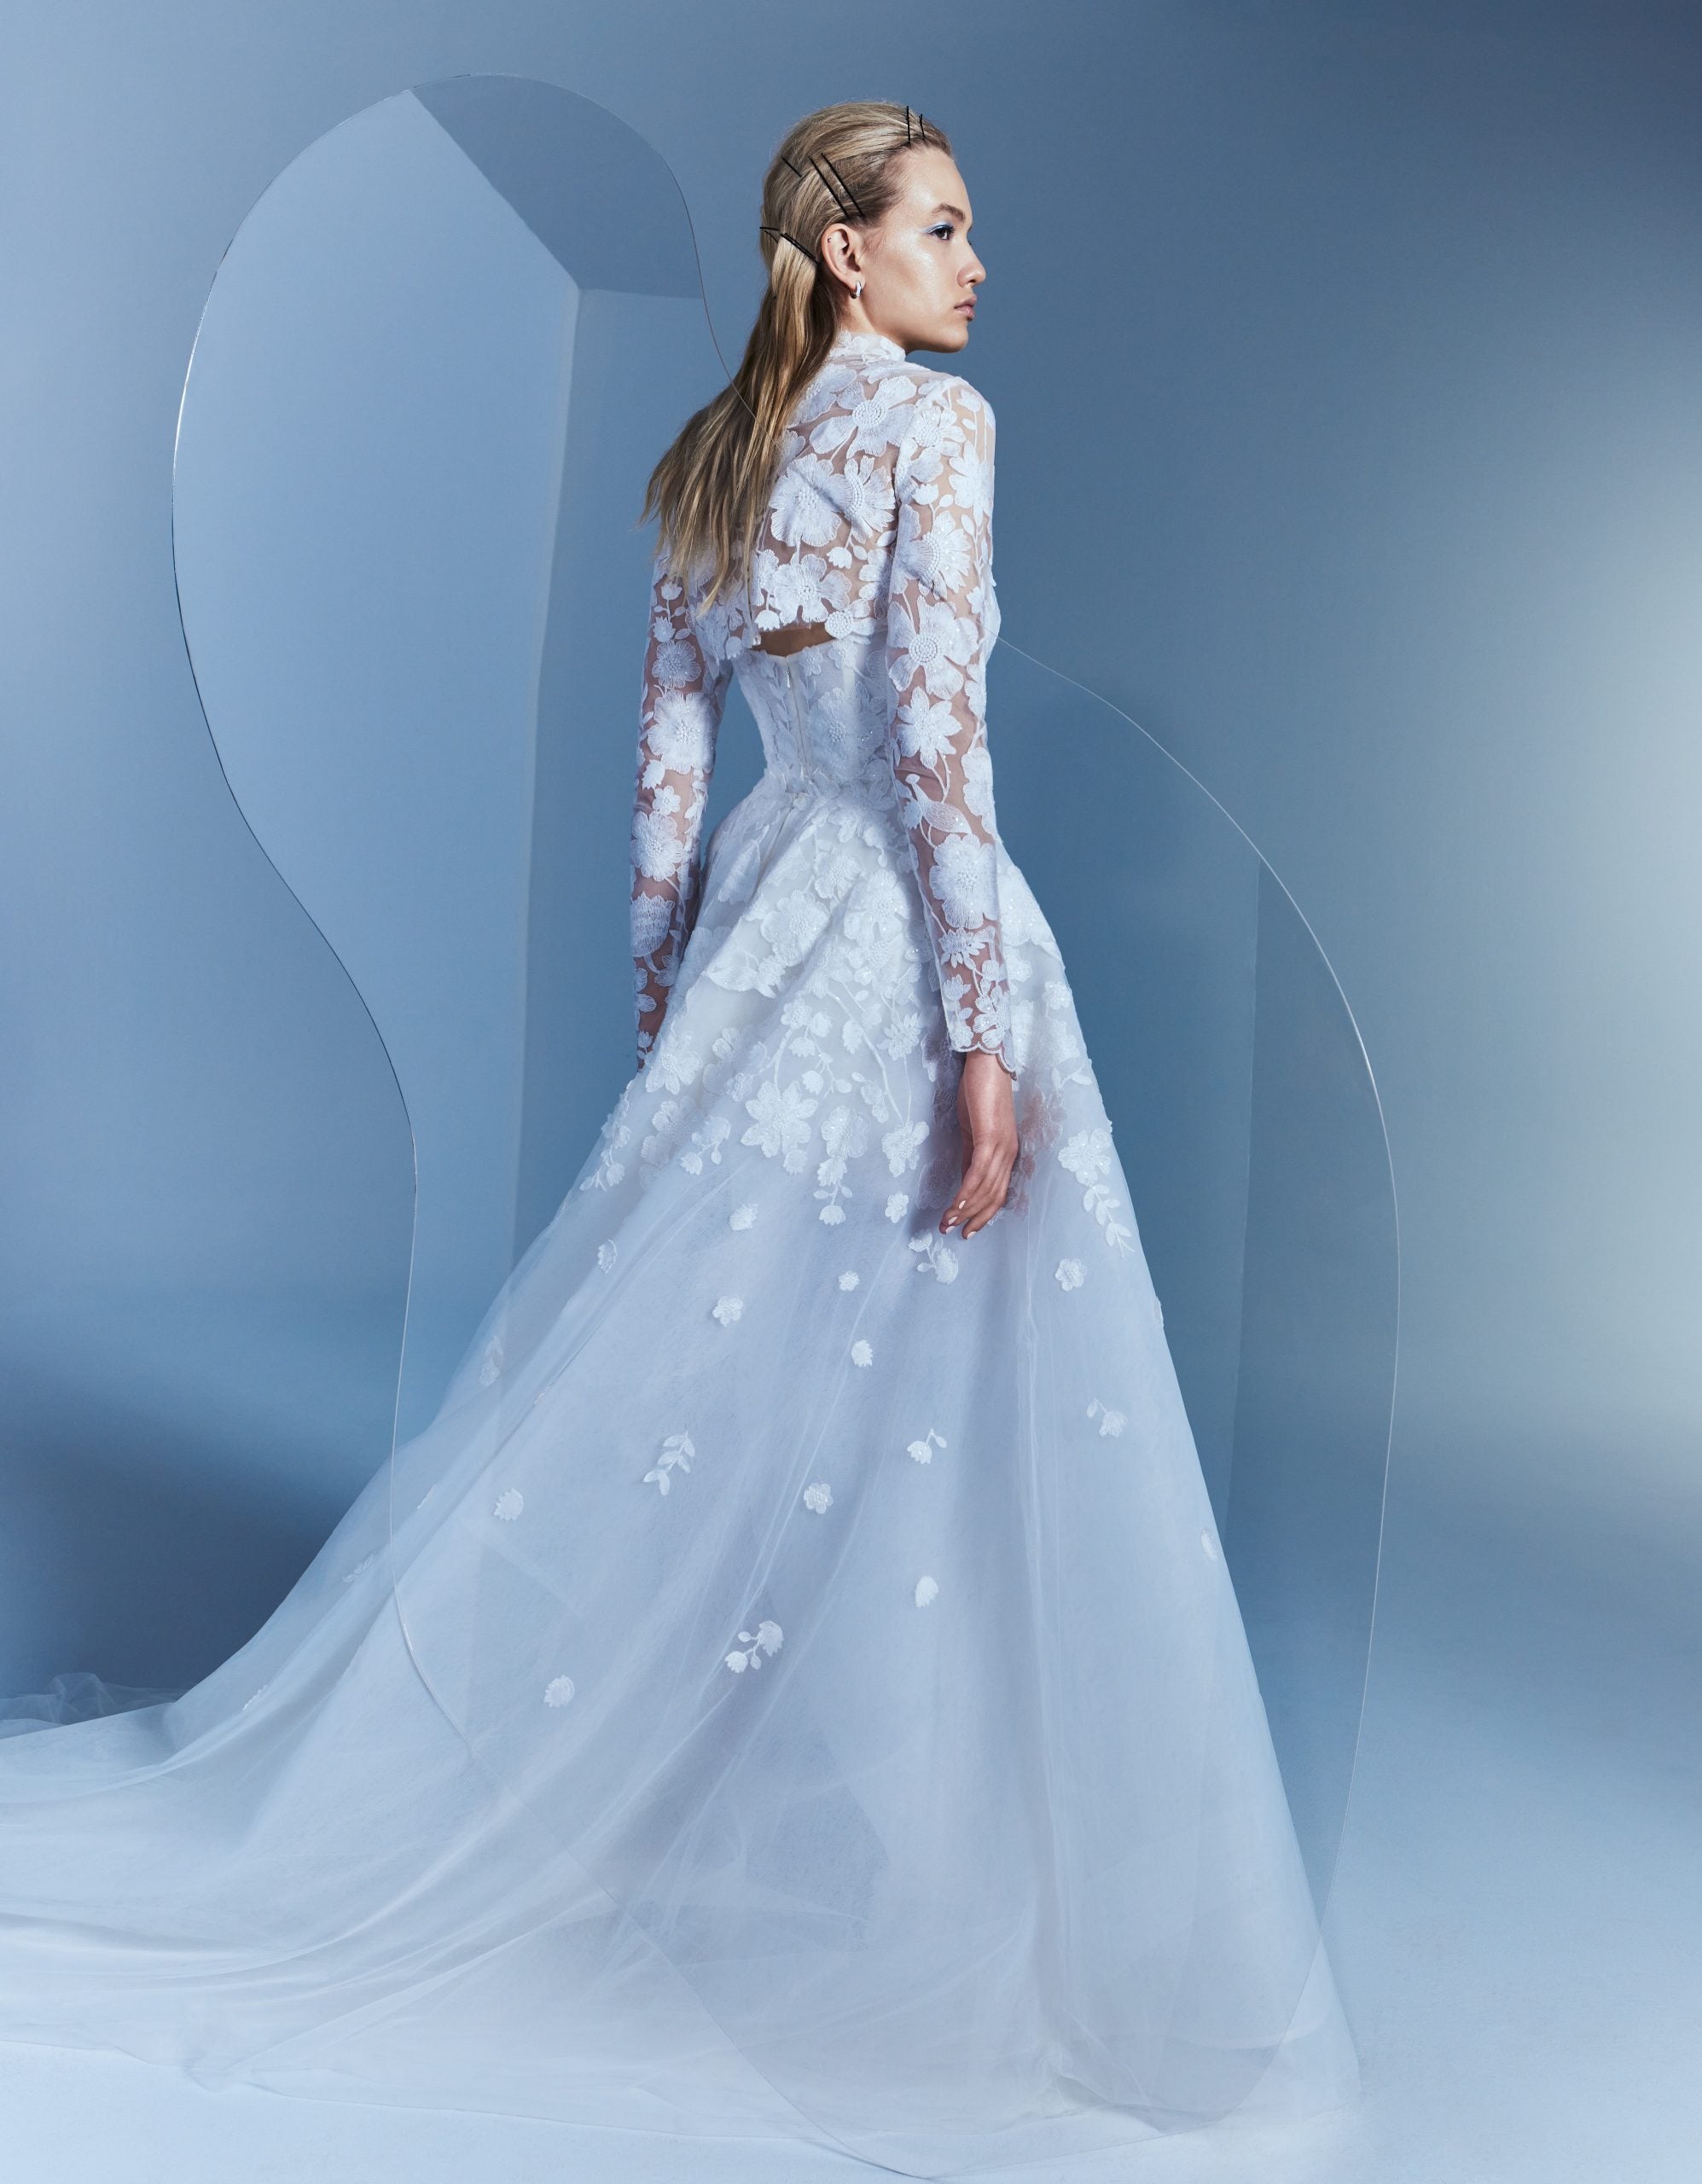 Romantic Convertible High-Necked Long Sleeve Gown by Alyne by Rita Vinieris - Image 2